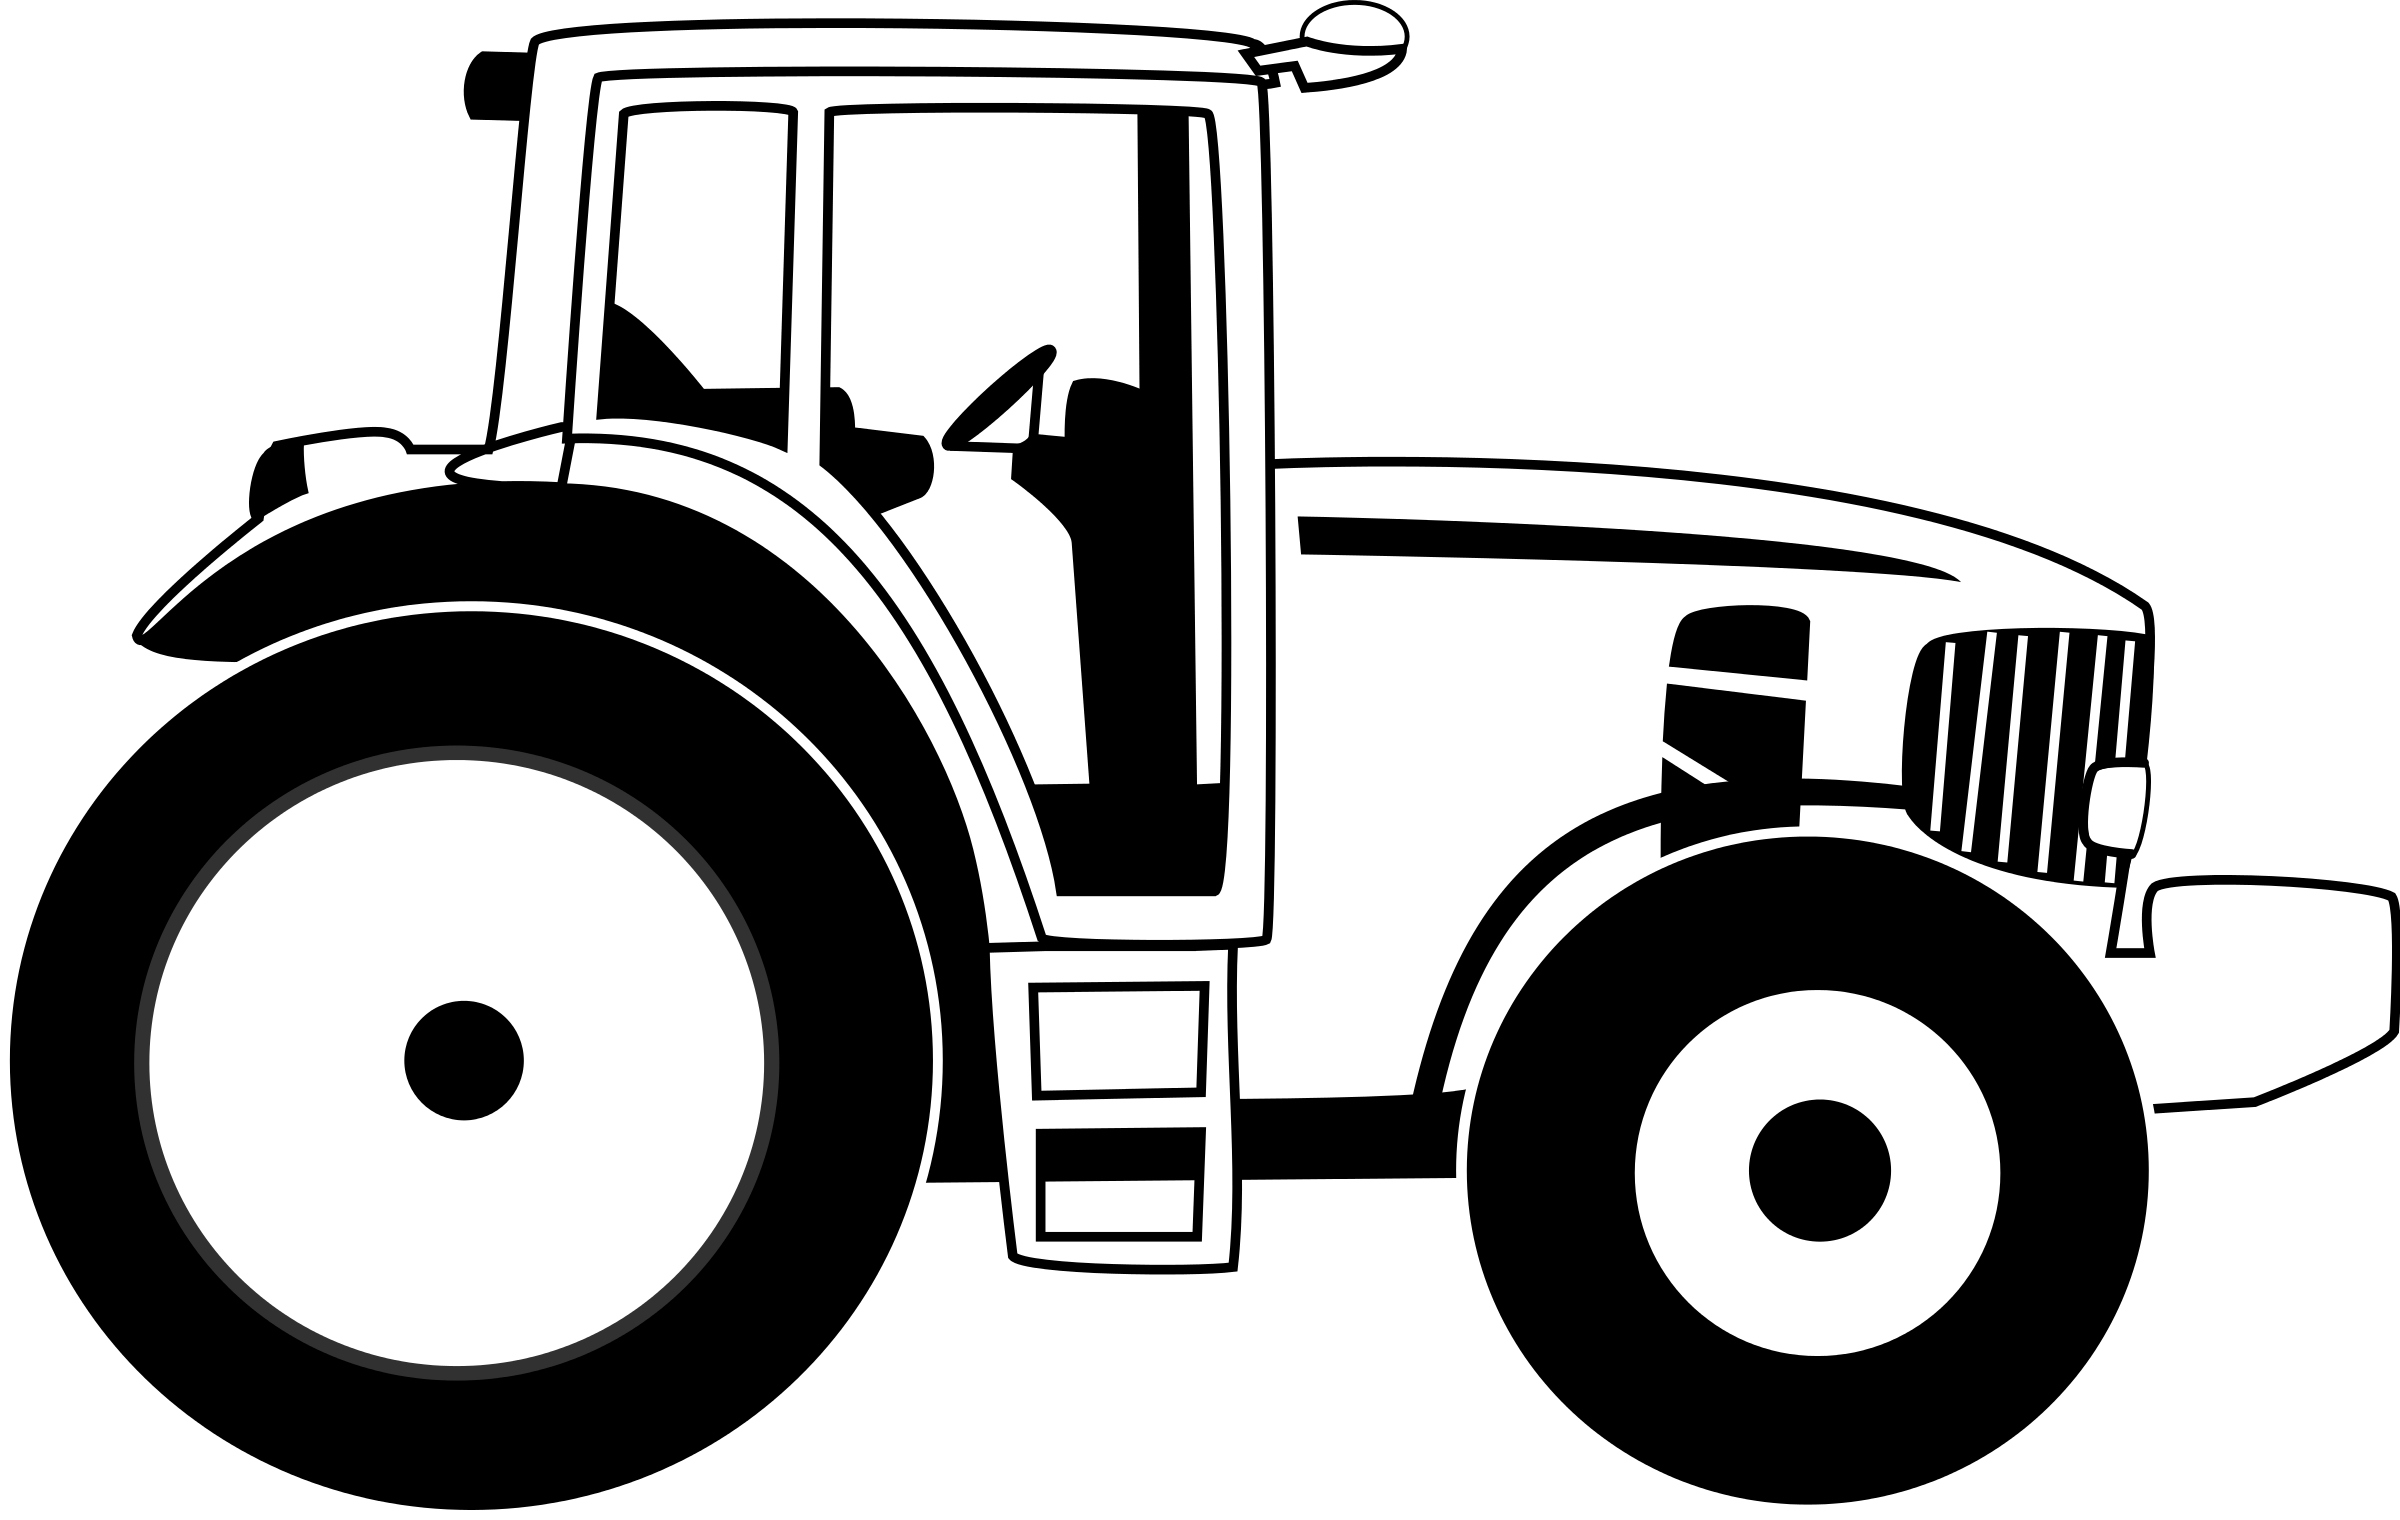 Clipart of a tractor